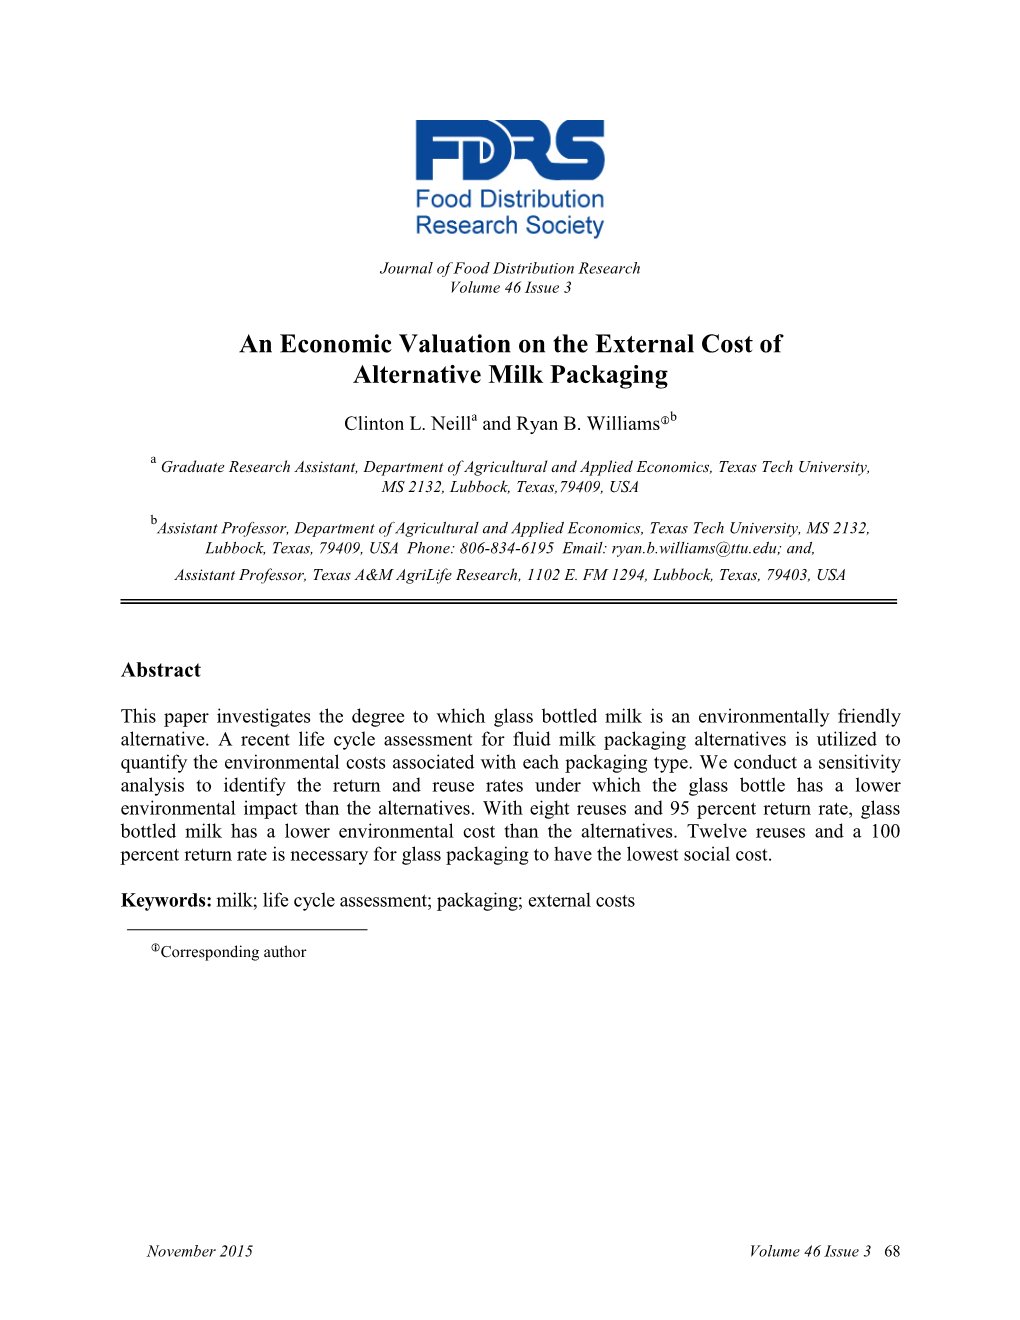 An Economic Valuation on the External Cost of Alternative Milk Packaging